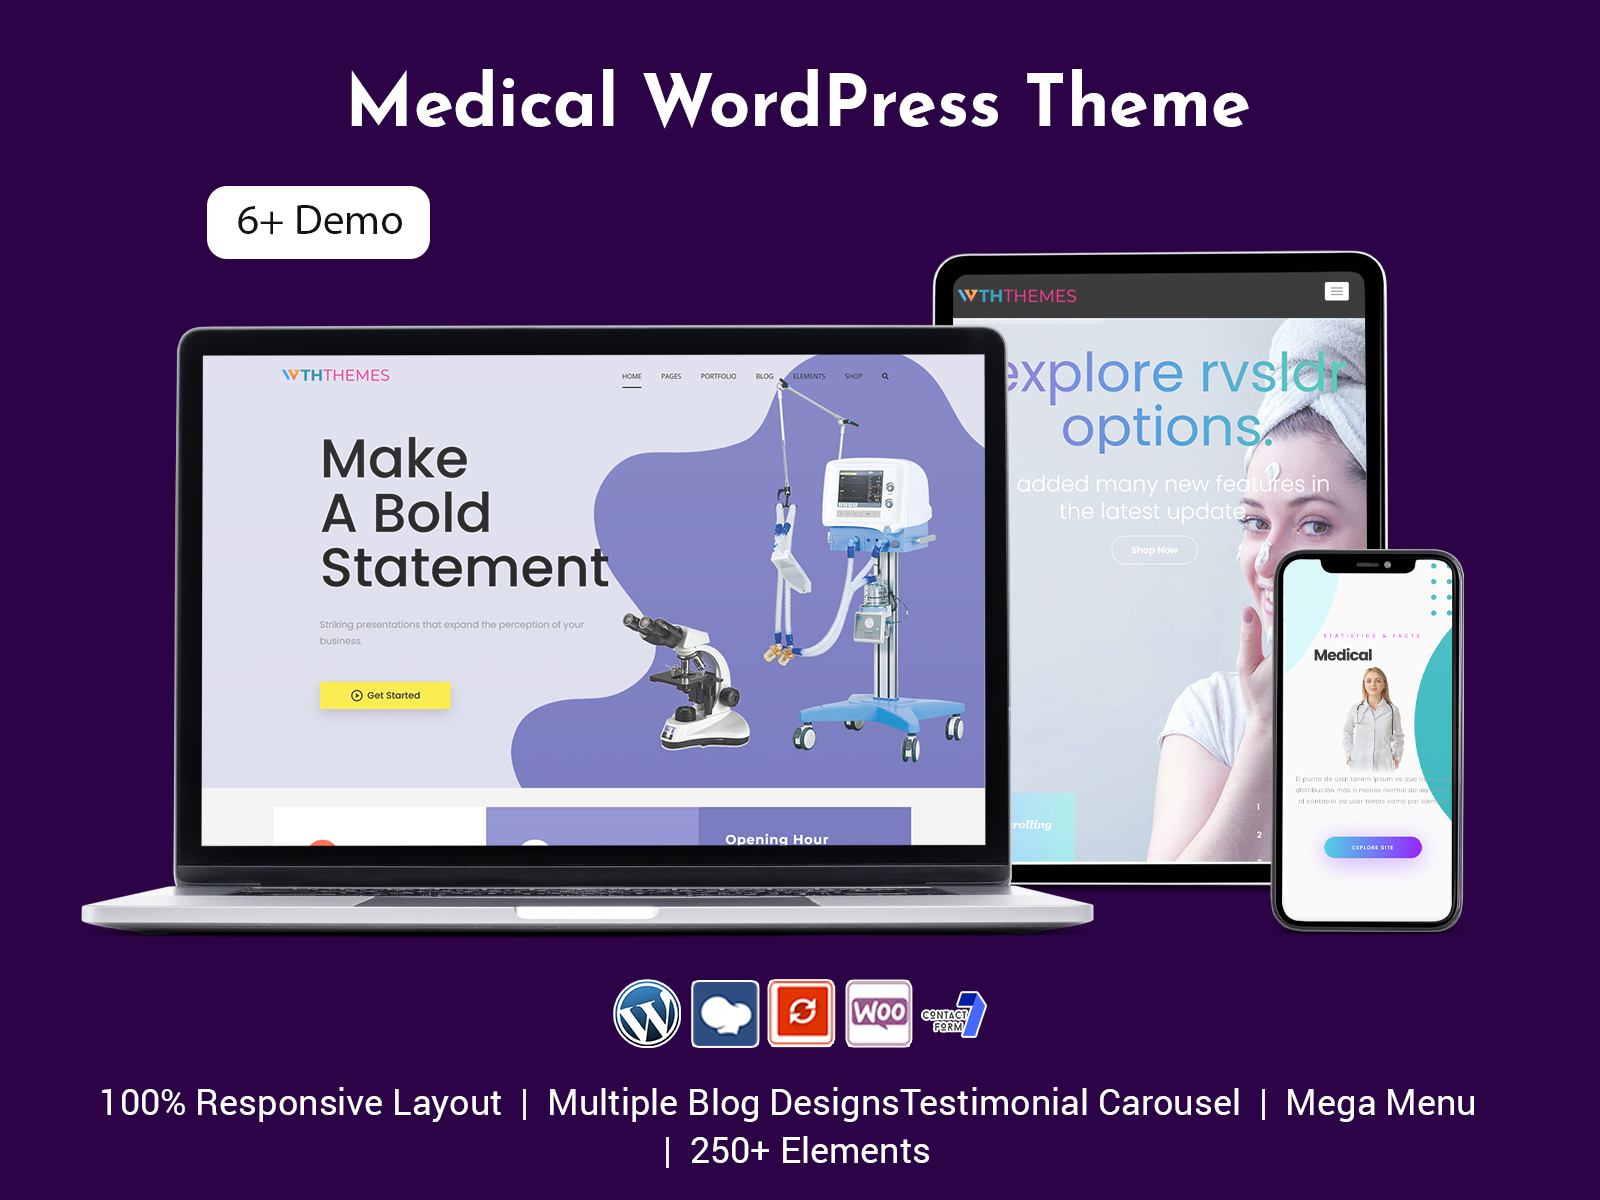 Responsive WordPress Theme Is Suitable For All Health-Related Websites